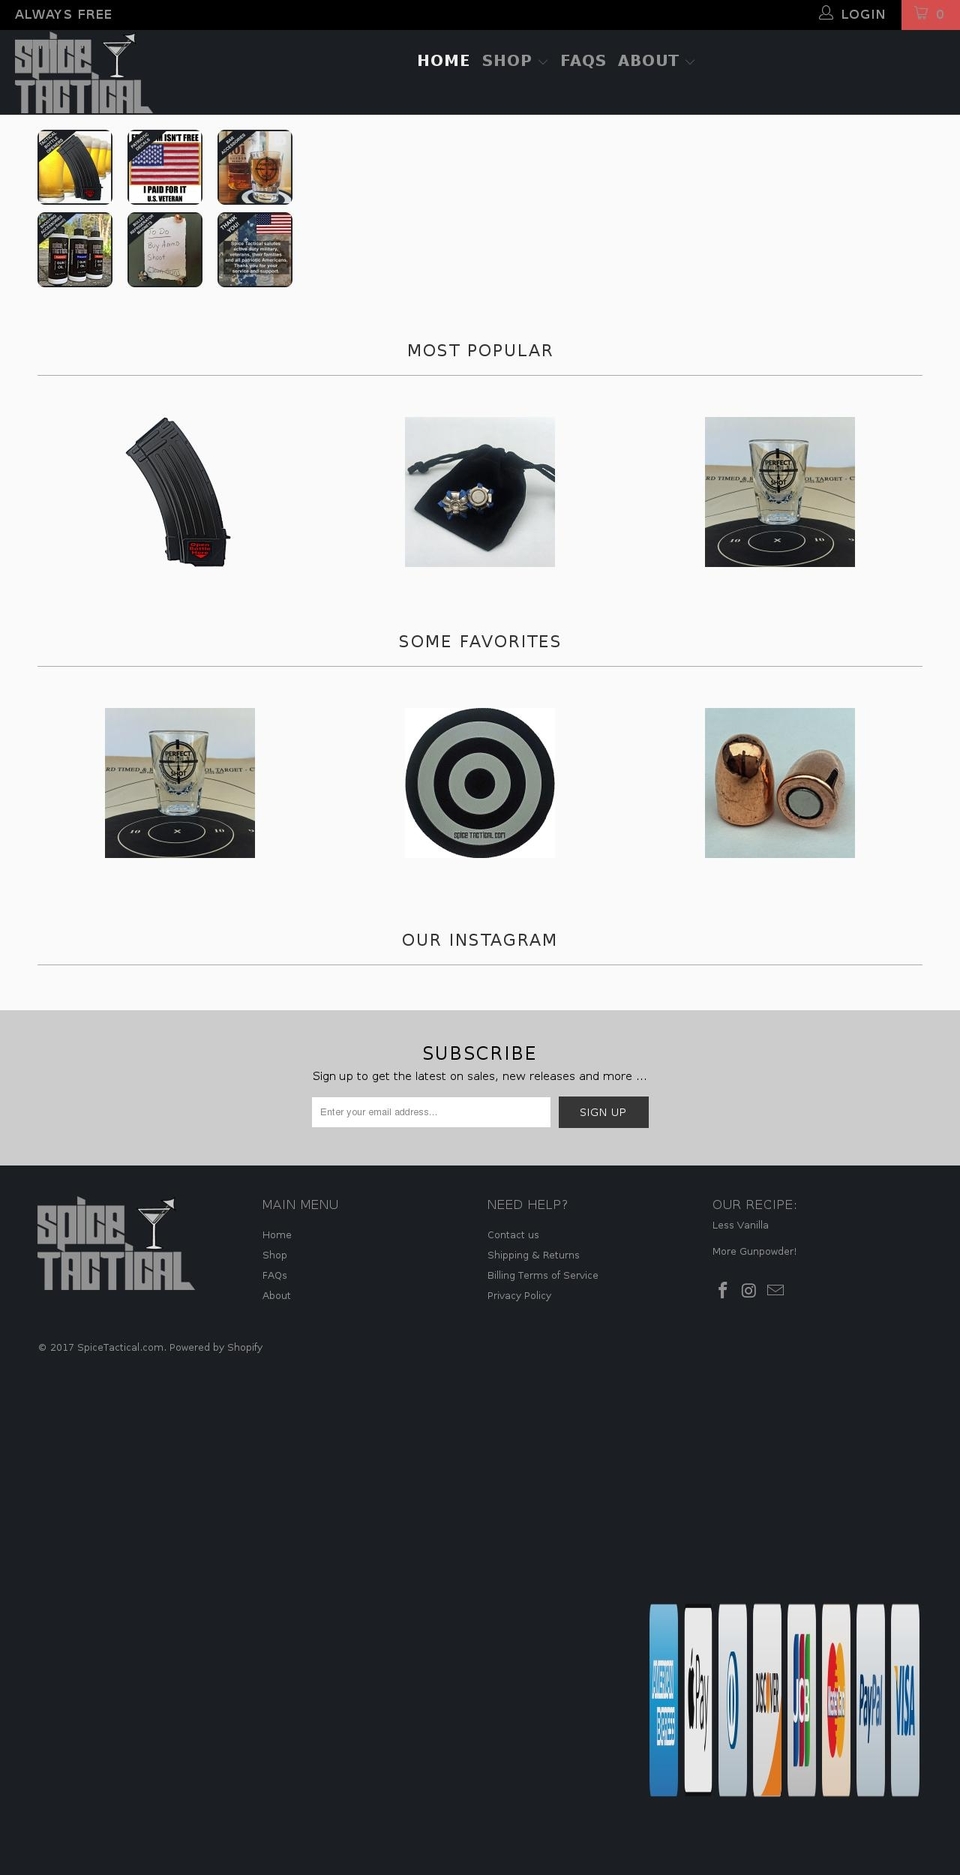 turbo 207 Live on 170331 Shopify theme site example spicetactical.com